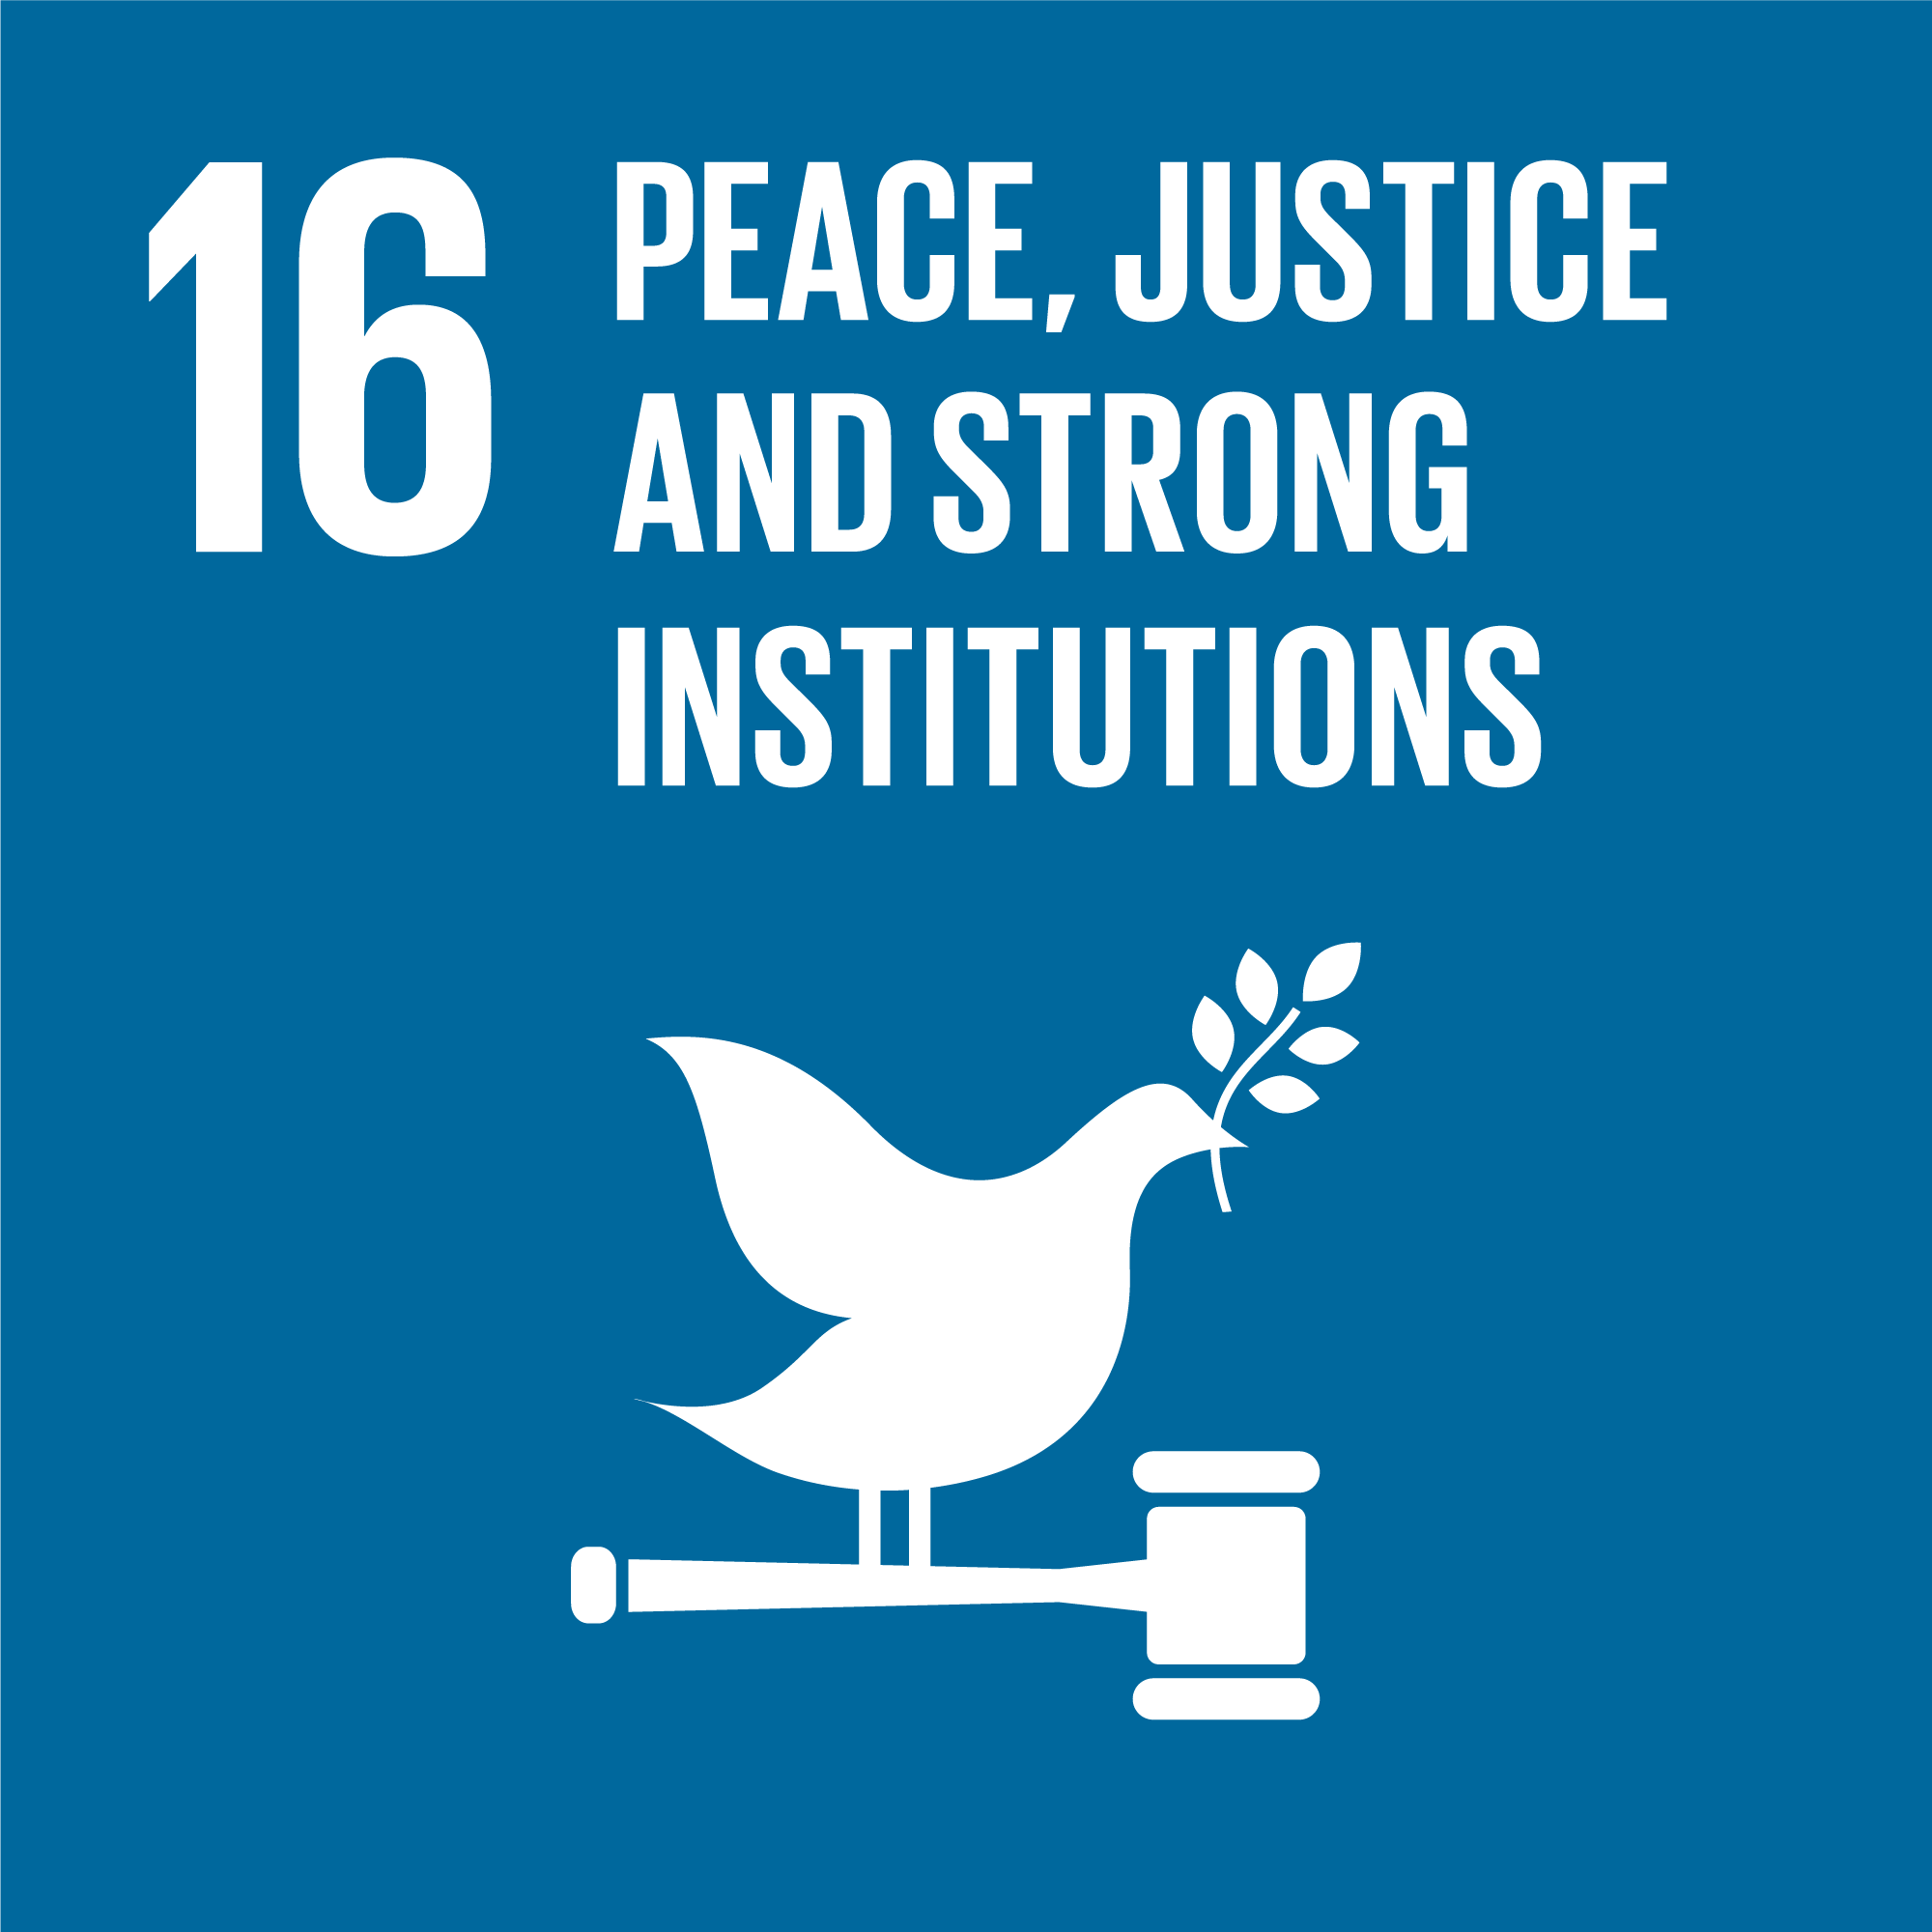 UN SDG 16 Peace, Justice and Strong Institutions